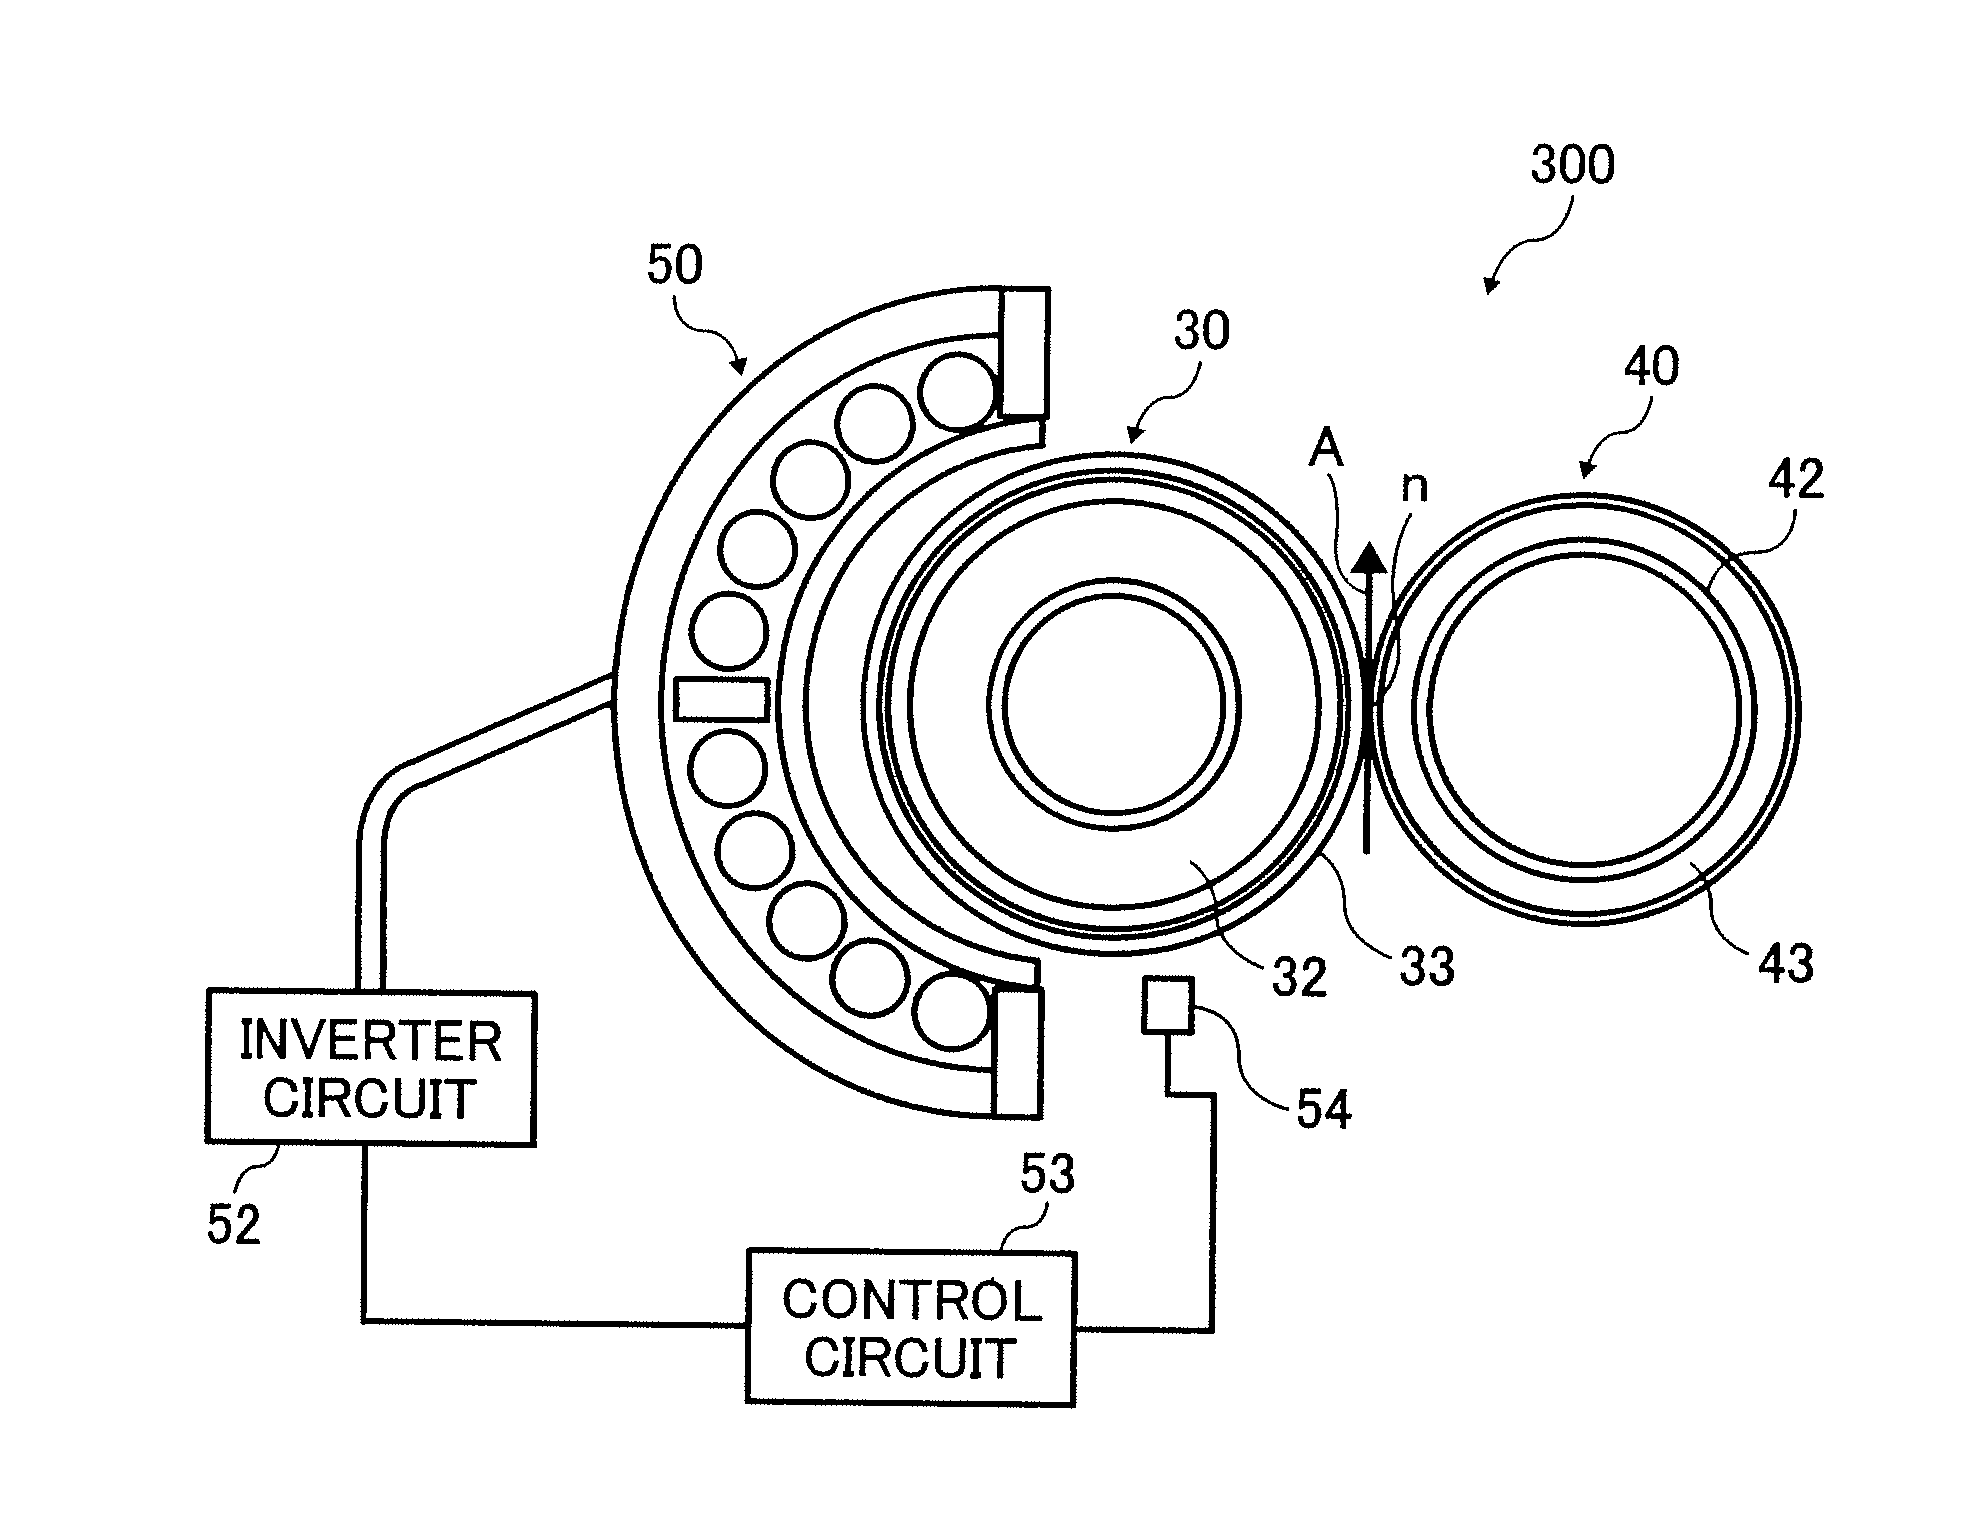 Fixer and image forming apparatus including the same